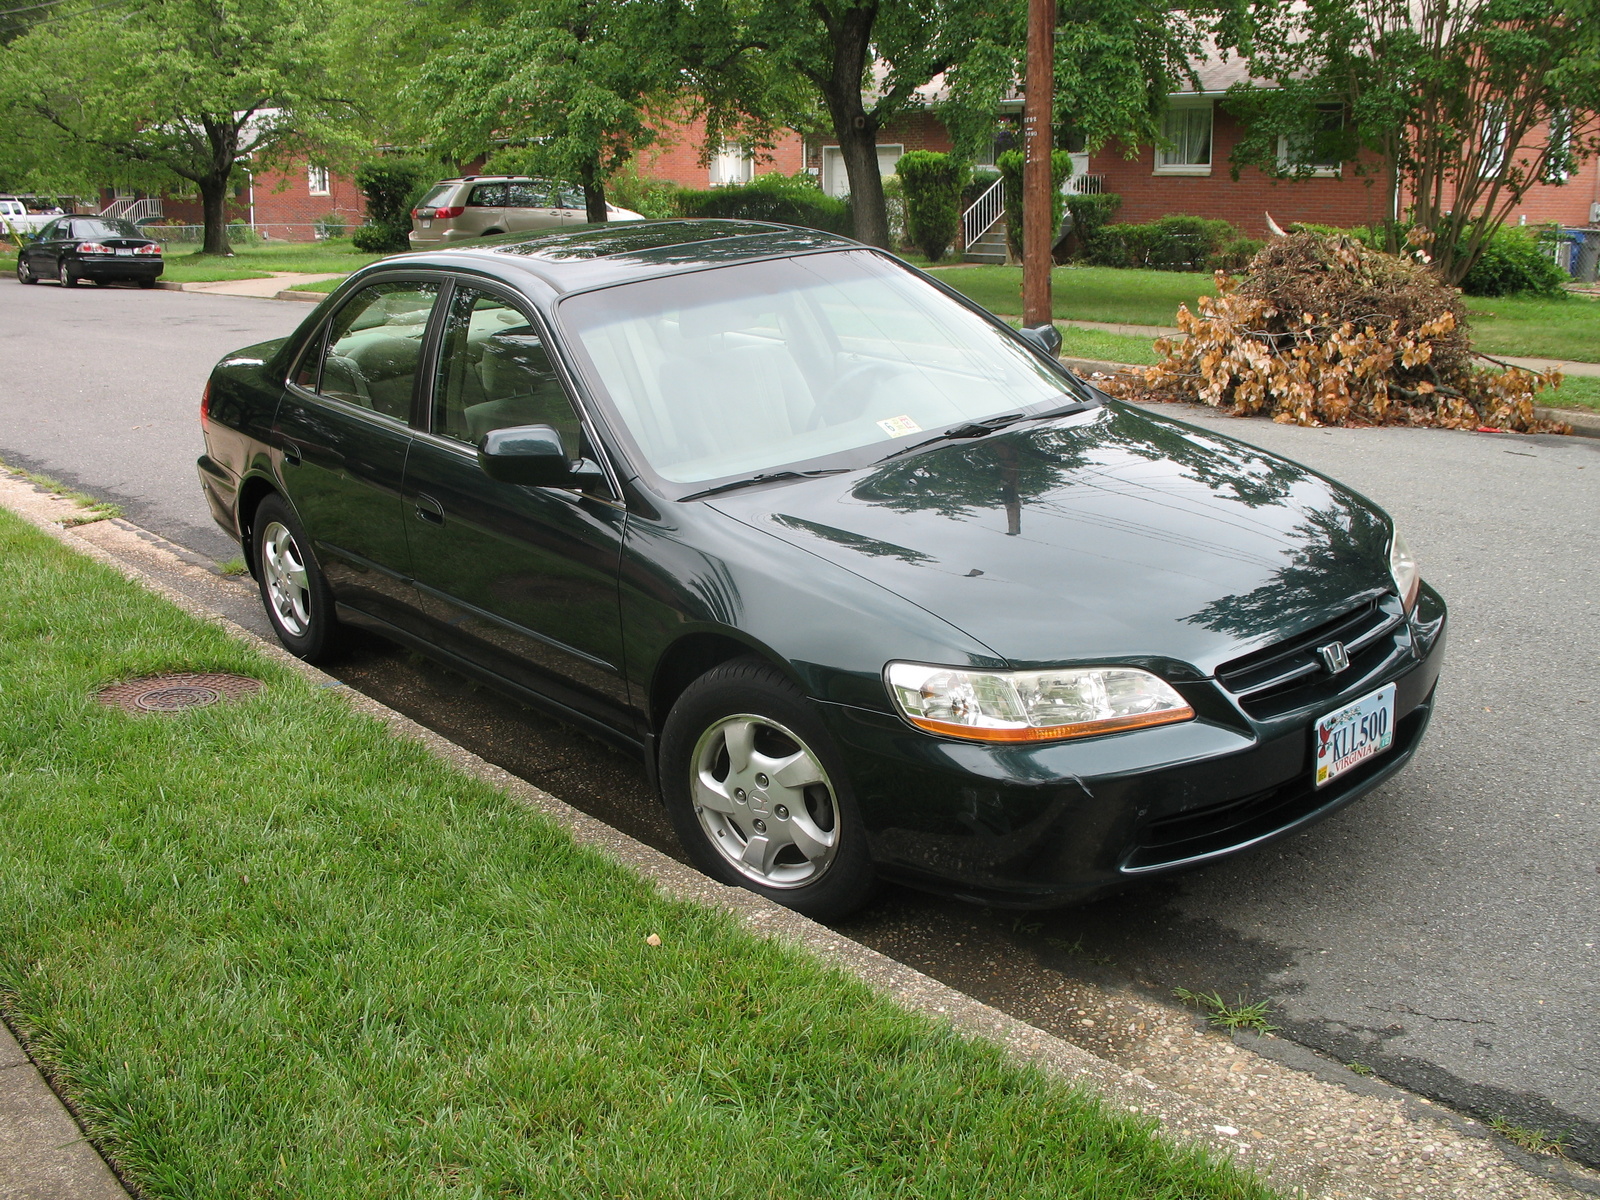 Used 2000 honda accord coupe for sale #3